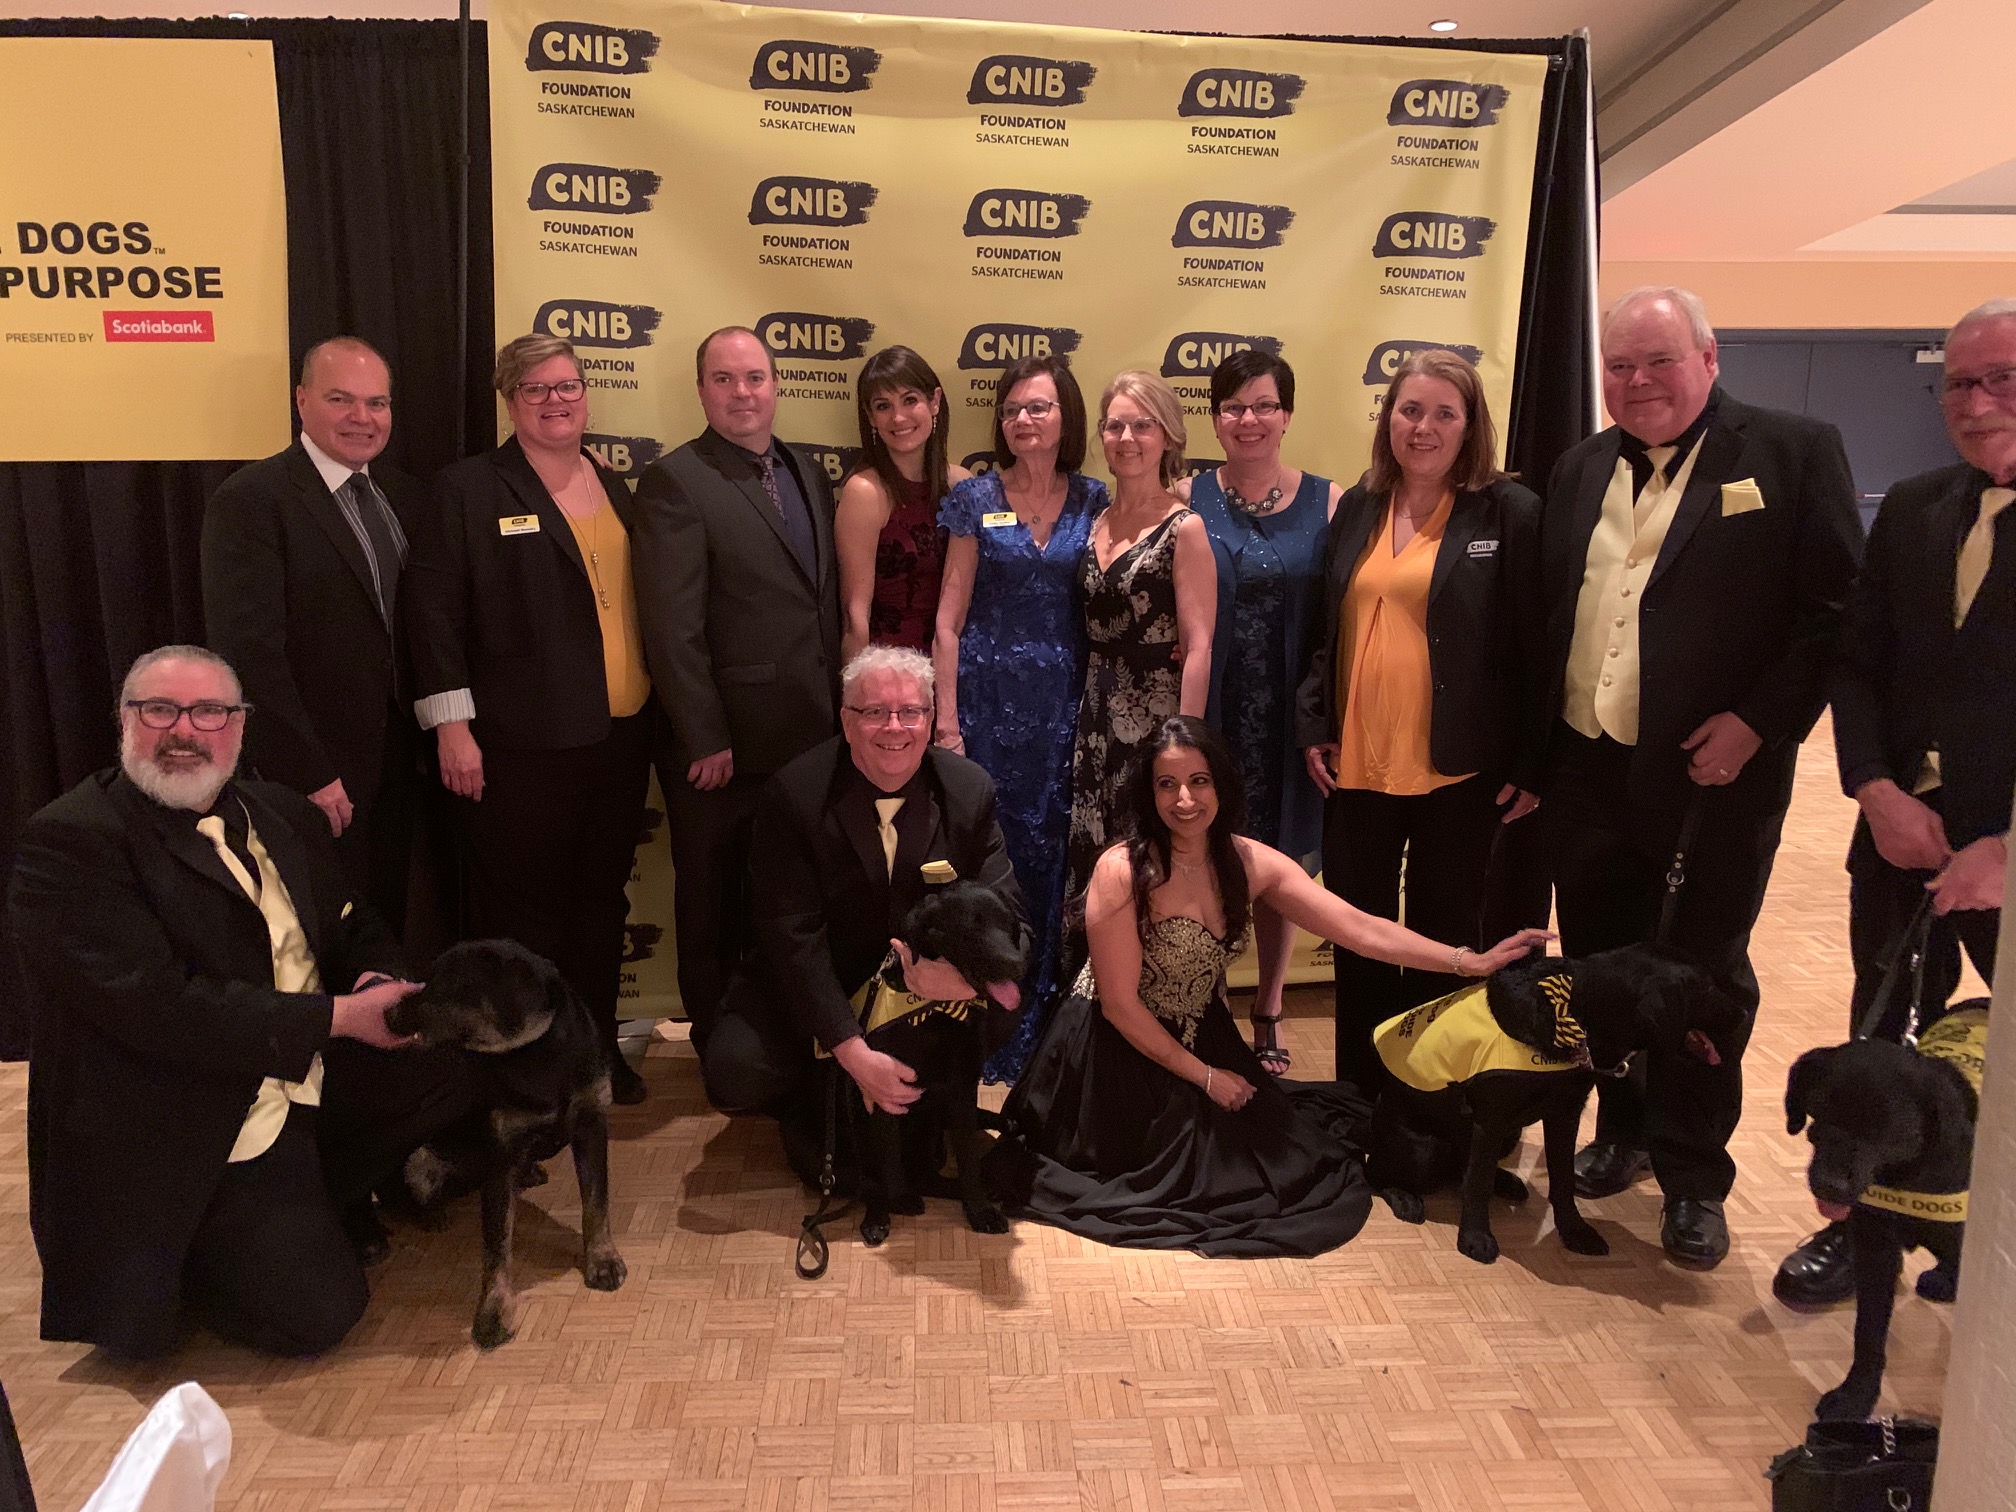 A large group of CNIB Staff and Volunteers pose in front of a branded CNIB wallpaper at the Guide Dogs with Purpose Gala.